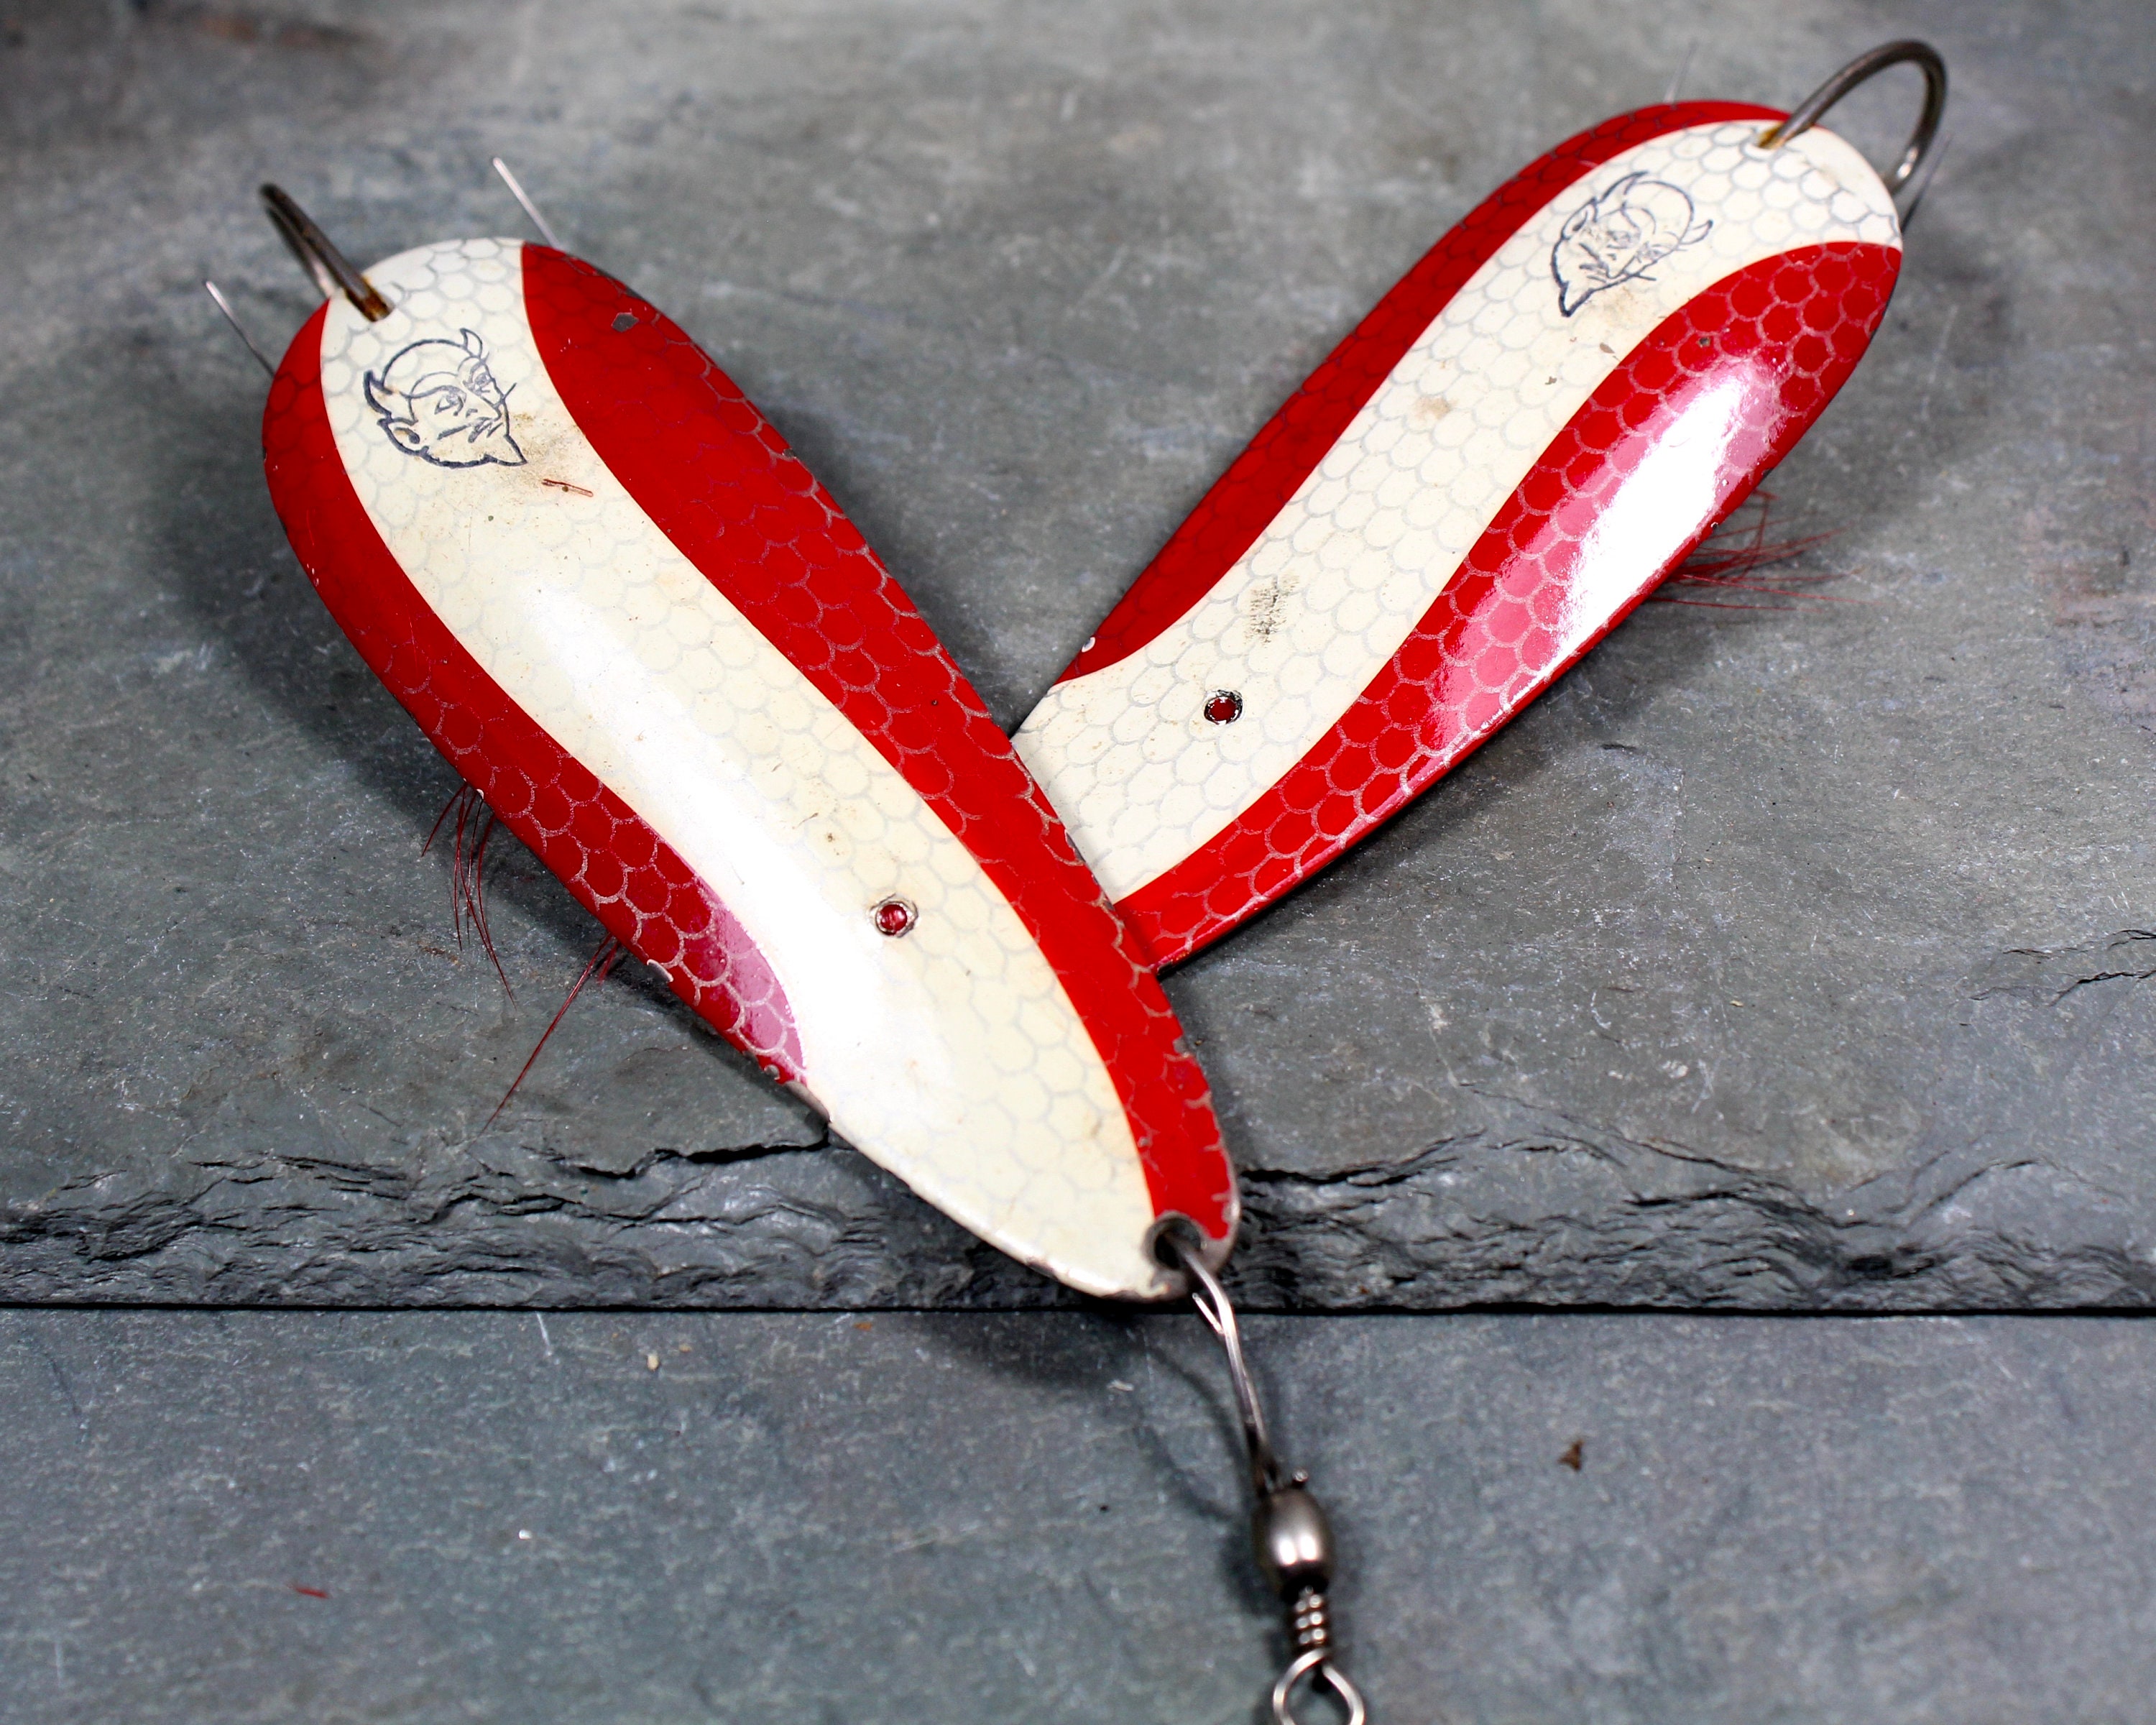 Vintage Daredevil Fishing Lures Set of 2 Circa 1950s Classic Red & White  Metal Lures FREE SHIPPING -  India